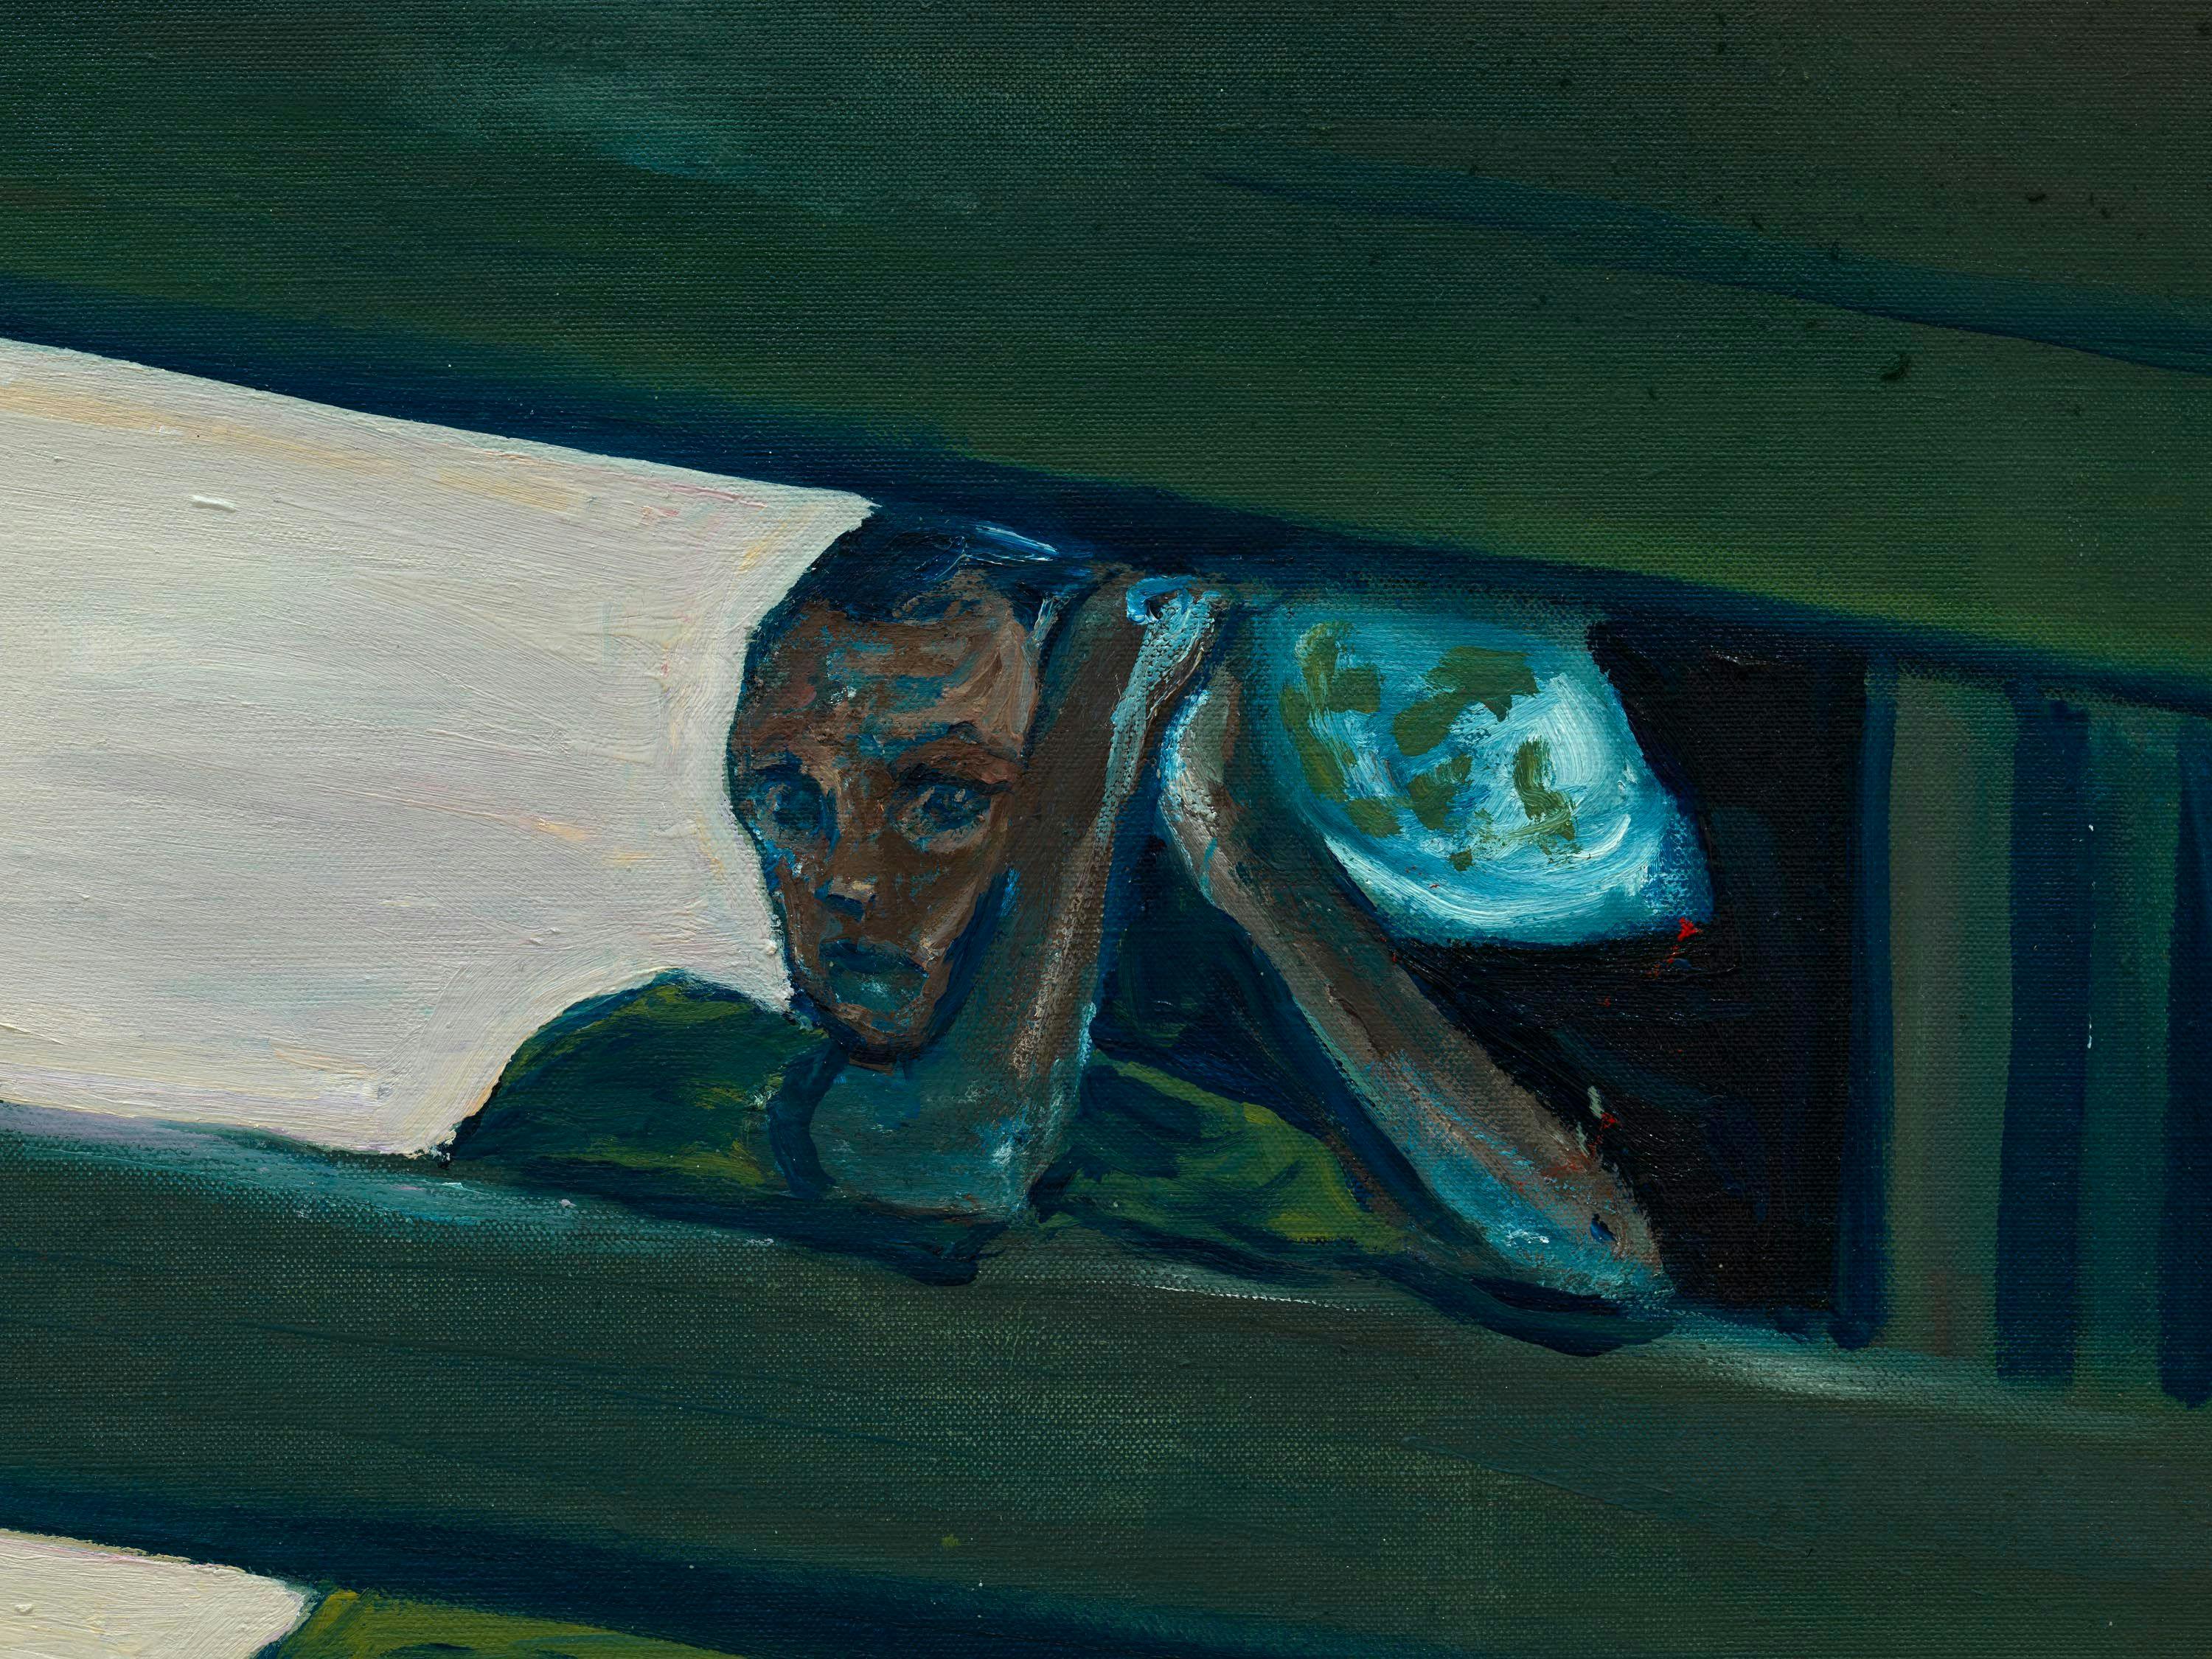 A detail from an oil and acrylic on linen artwork by Noah Davis, titled Another Balcony, dated 2009.